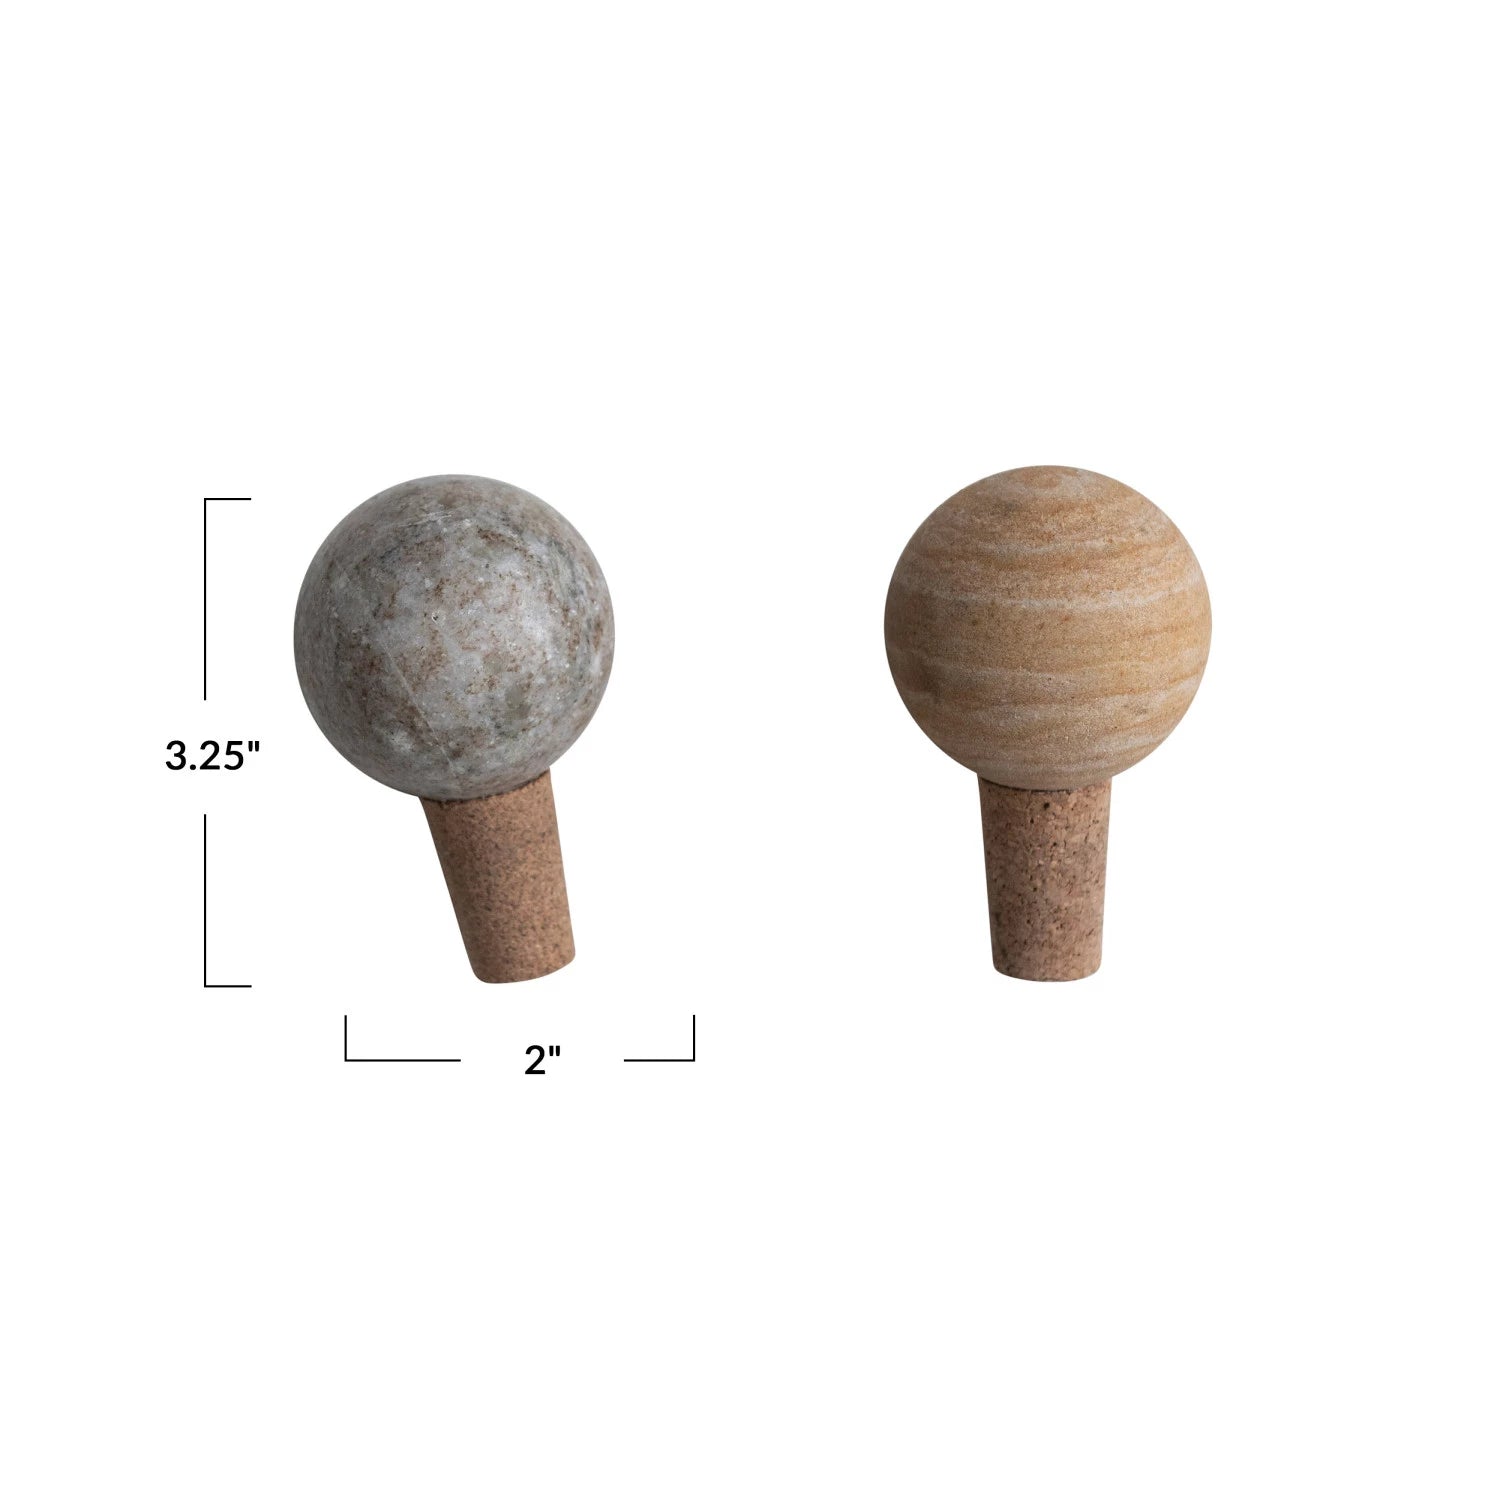 Marble and cork bottle stoppers measure 3 inches high and 2 inches wide. 